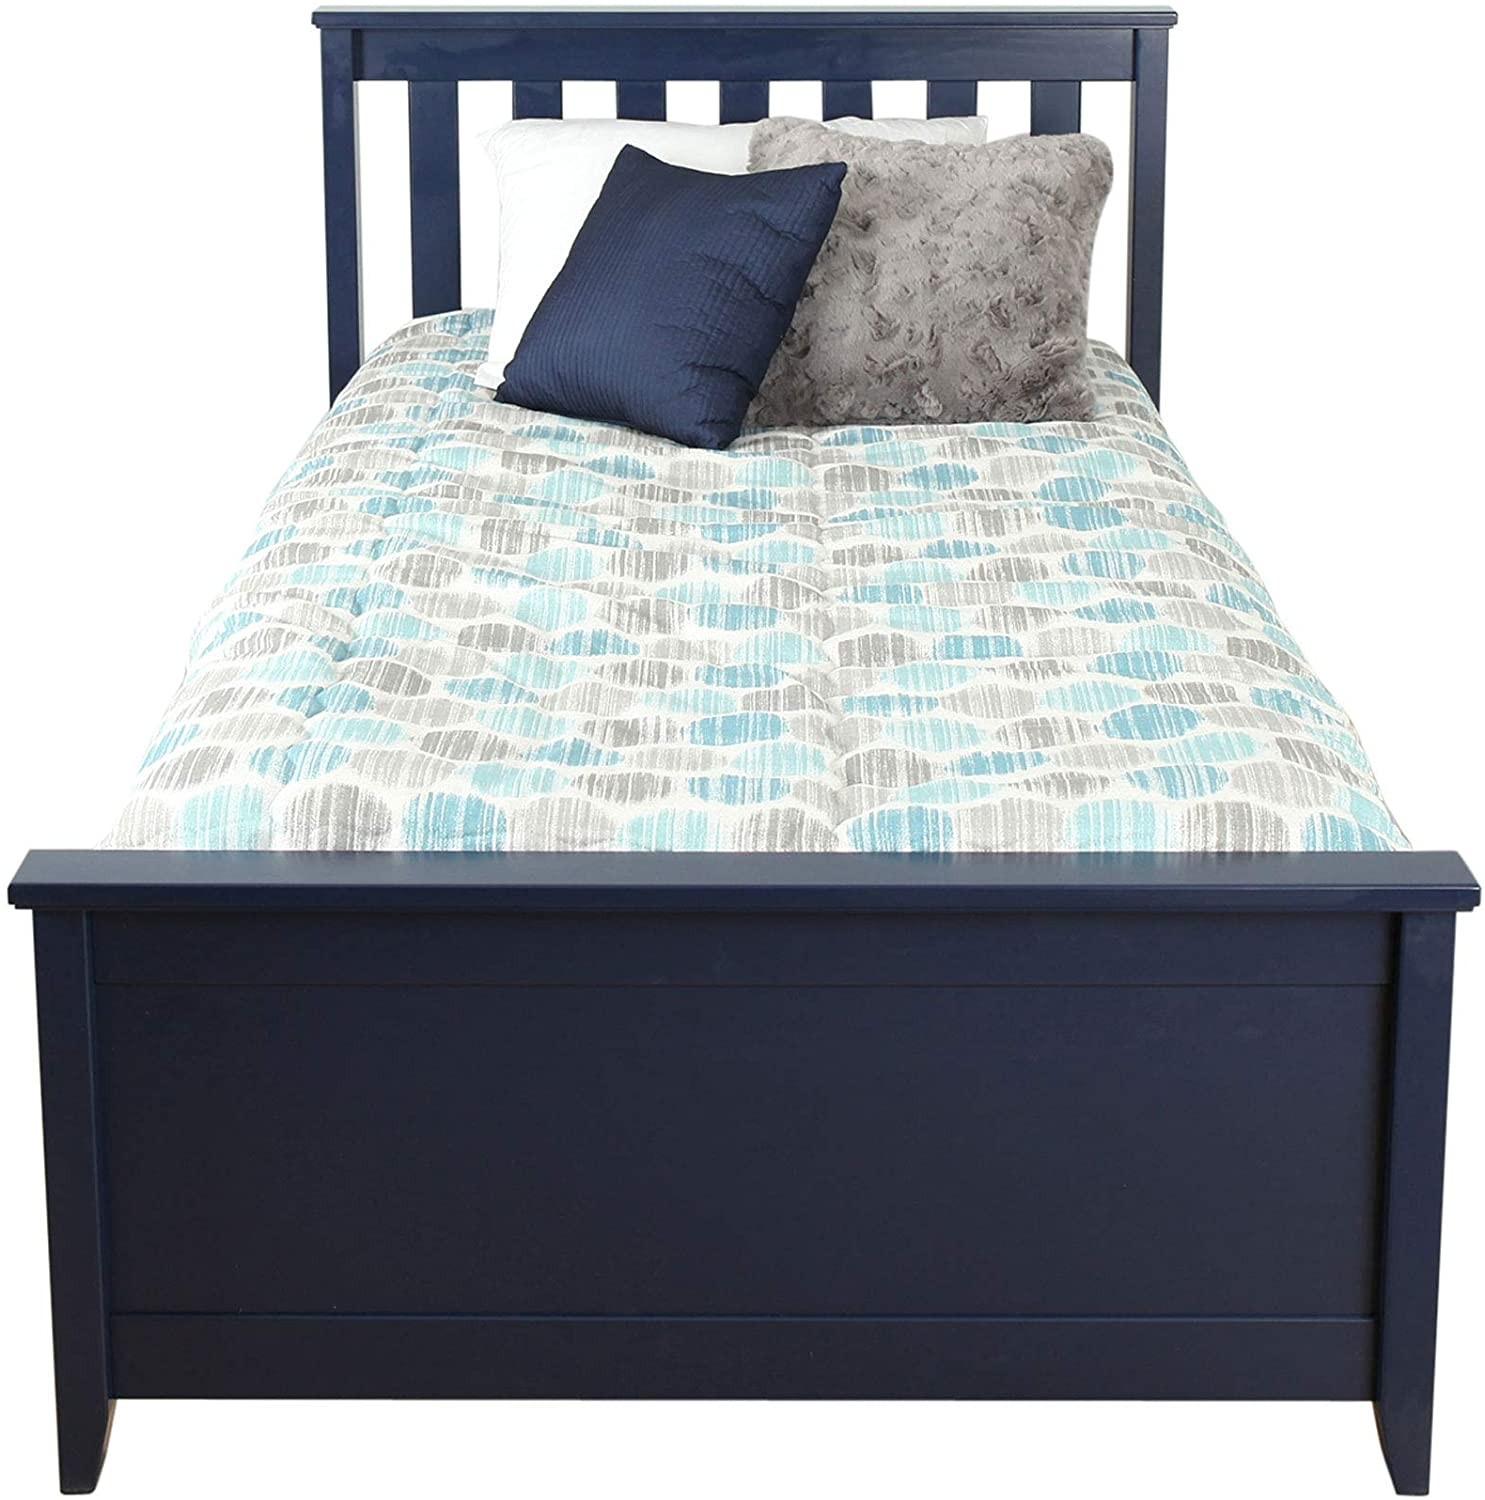 SOLID WOOD TWIN SIZE  PLATFORM BED IN BLUE FINISH WITH TRUNDLE BED